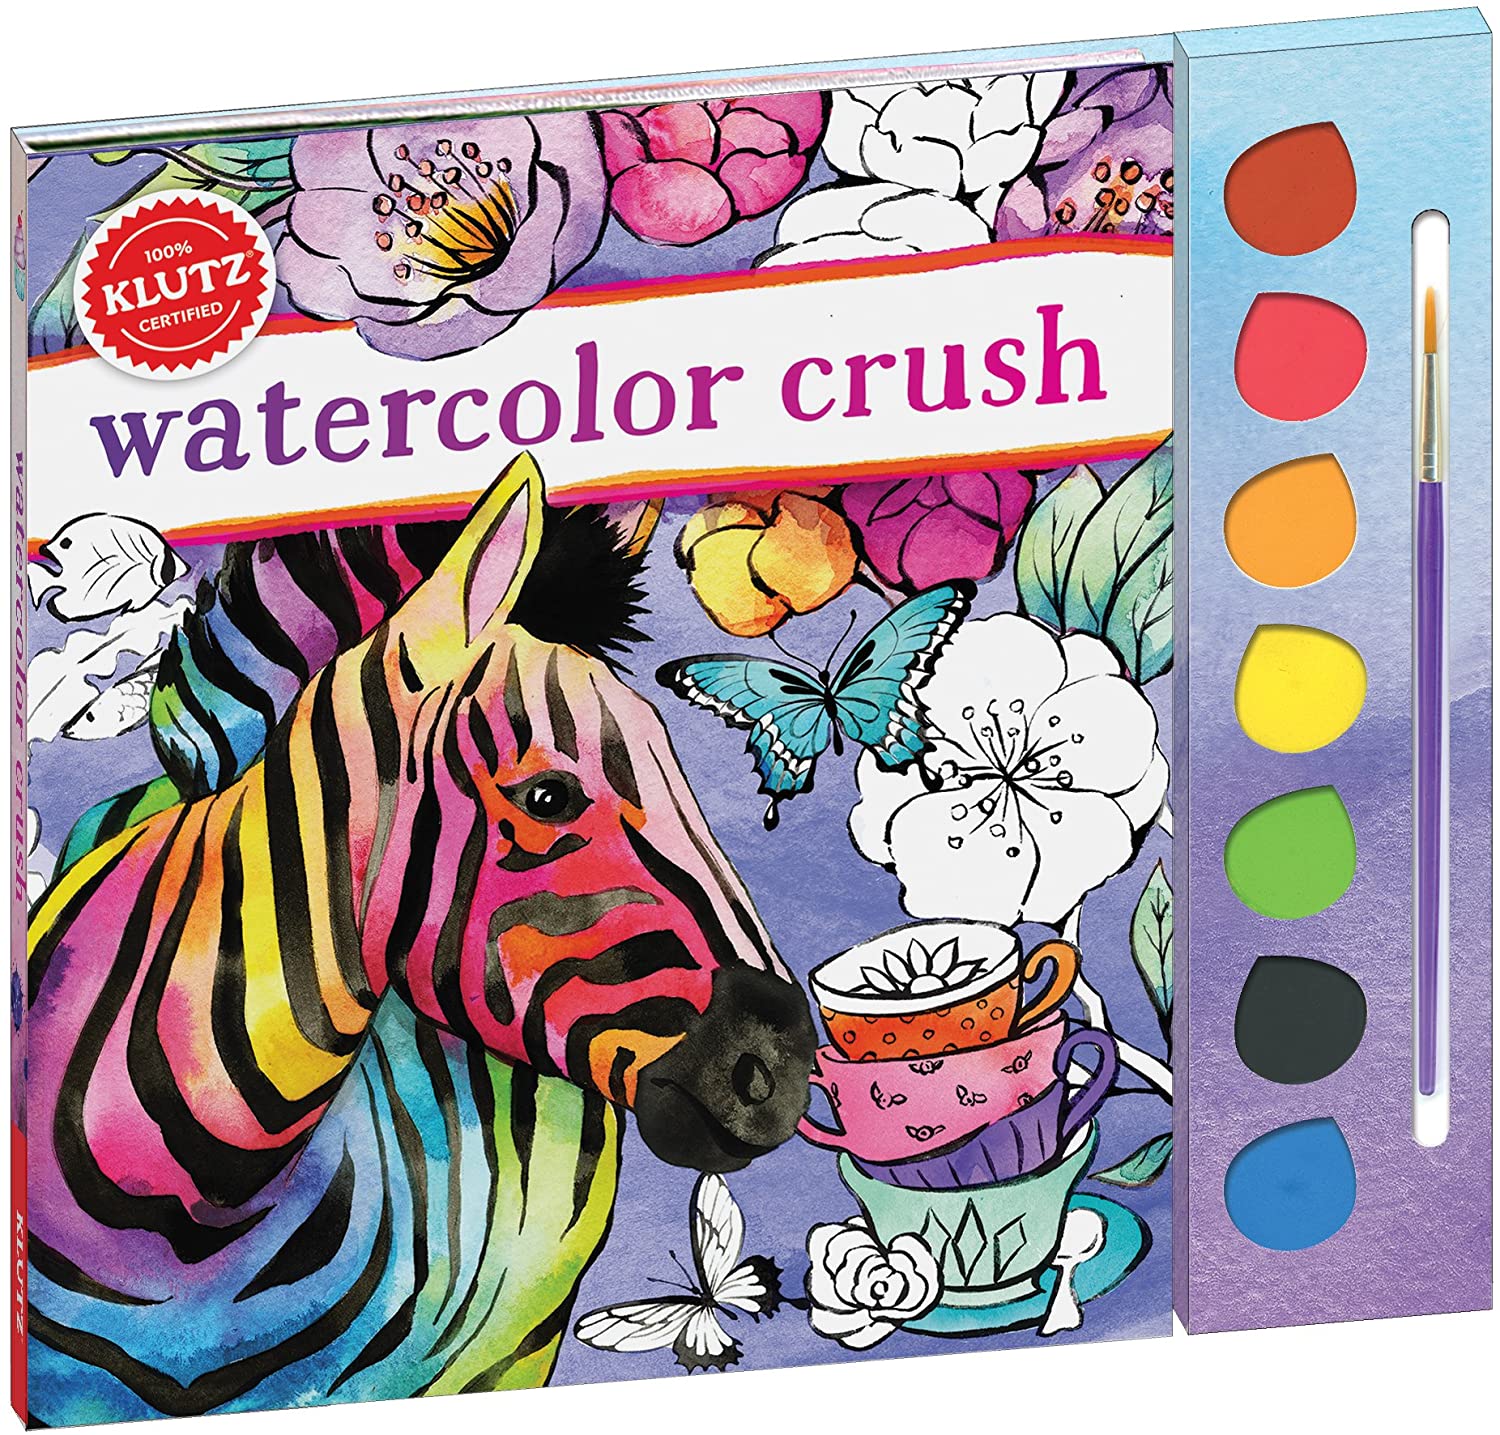 Klutz- Watercolor Crush Toy